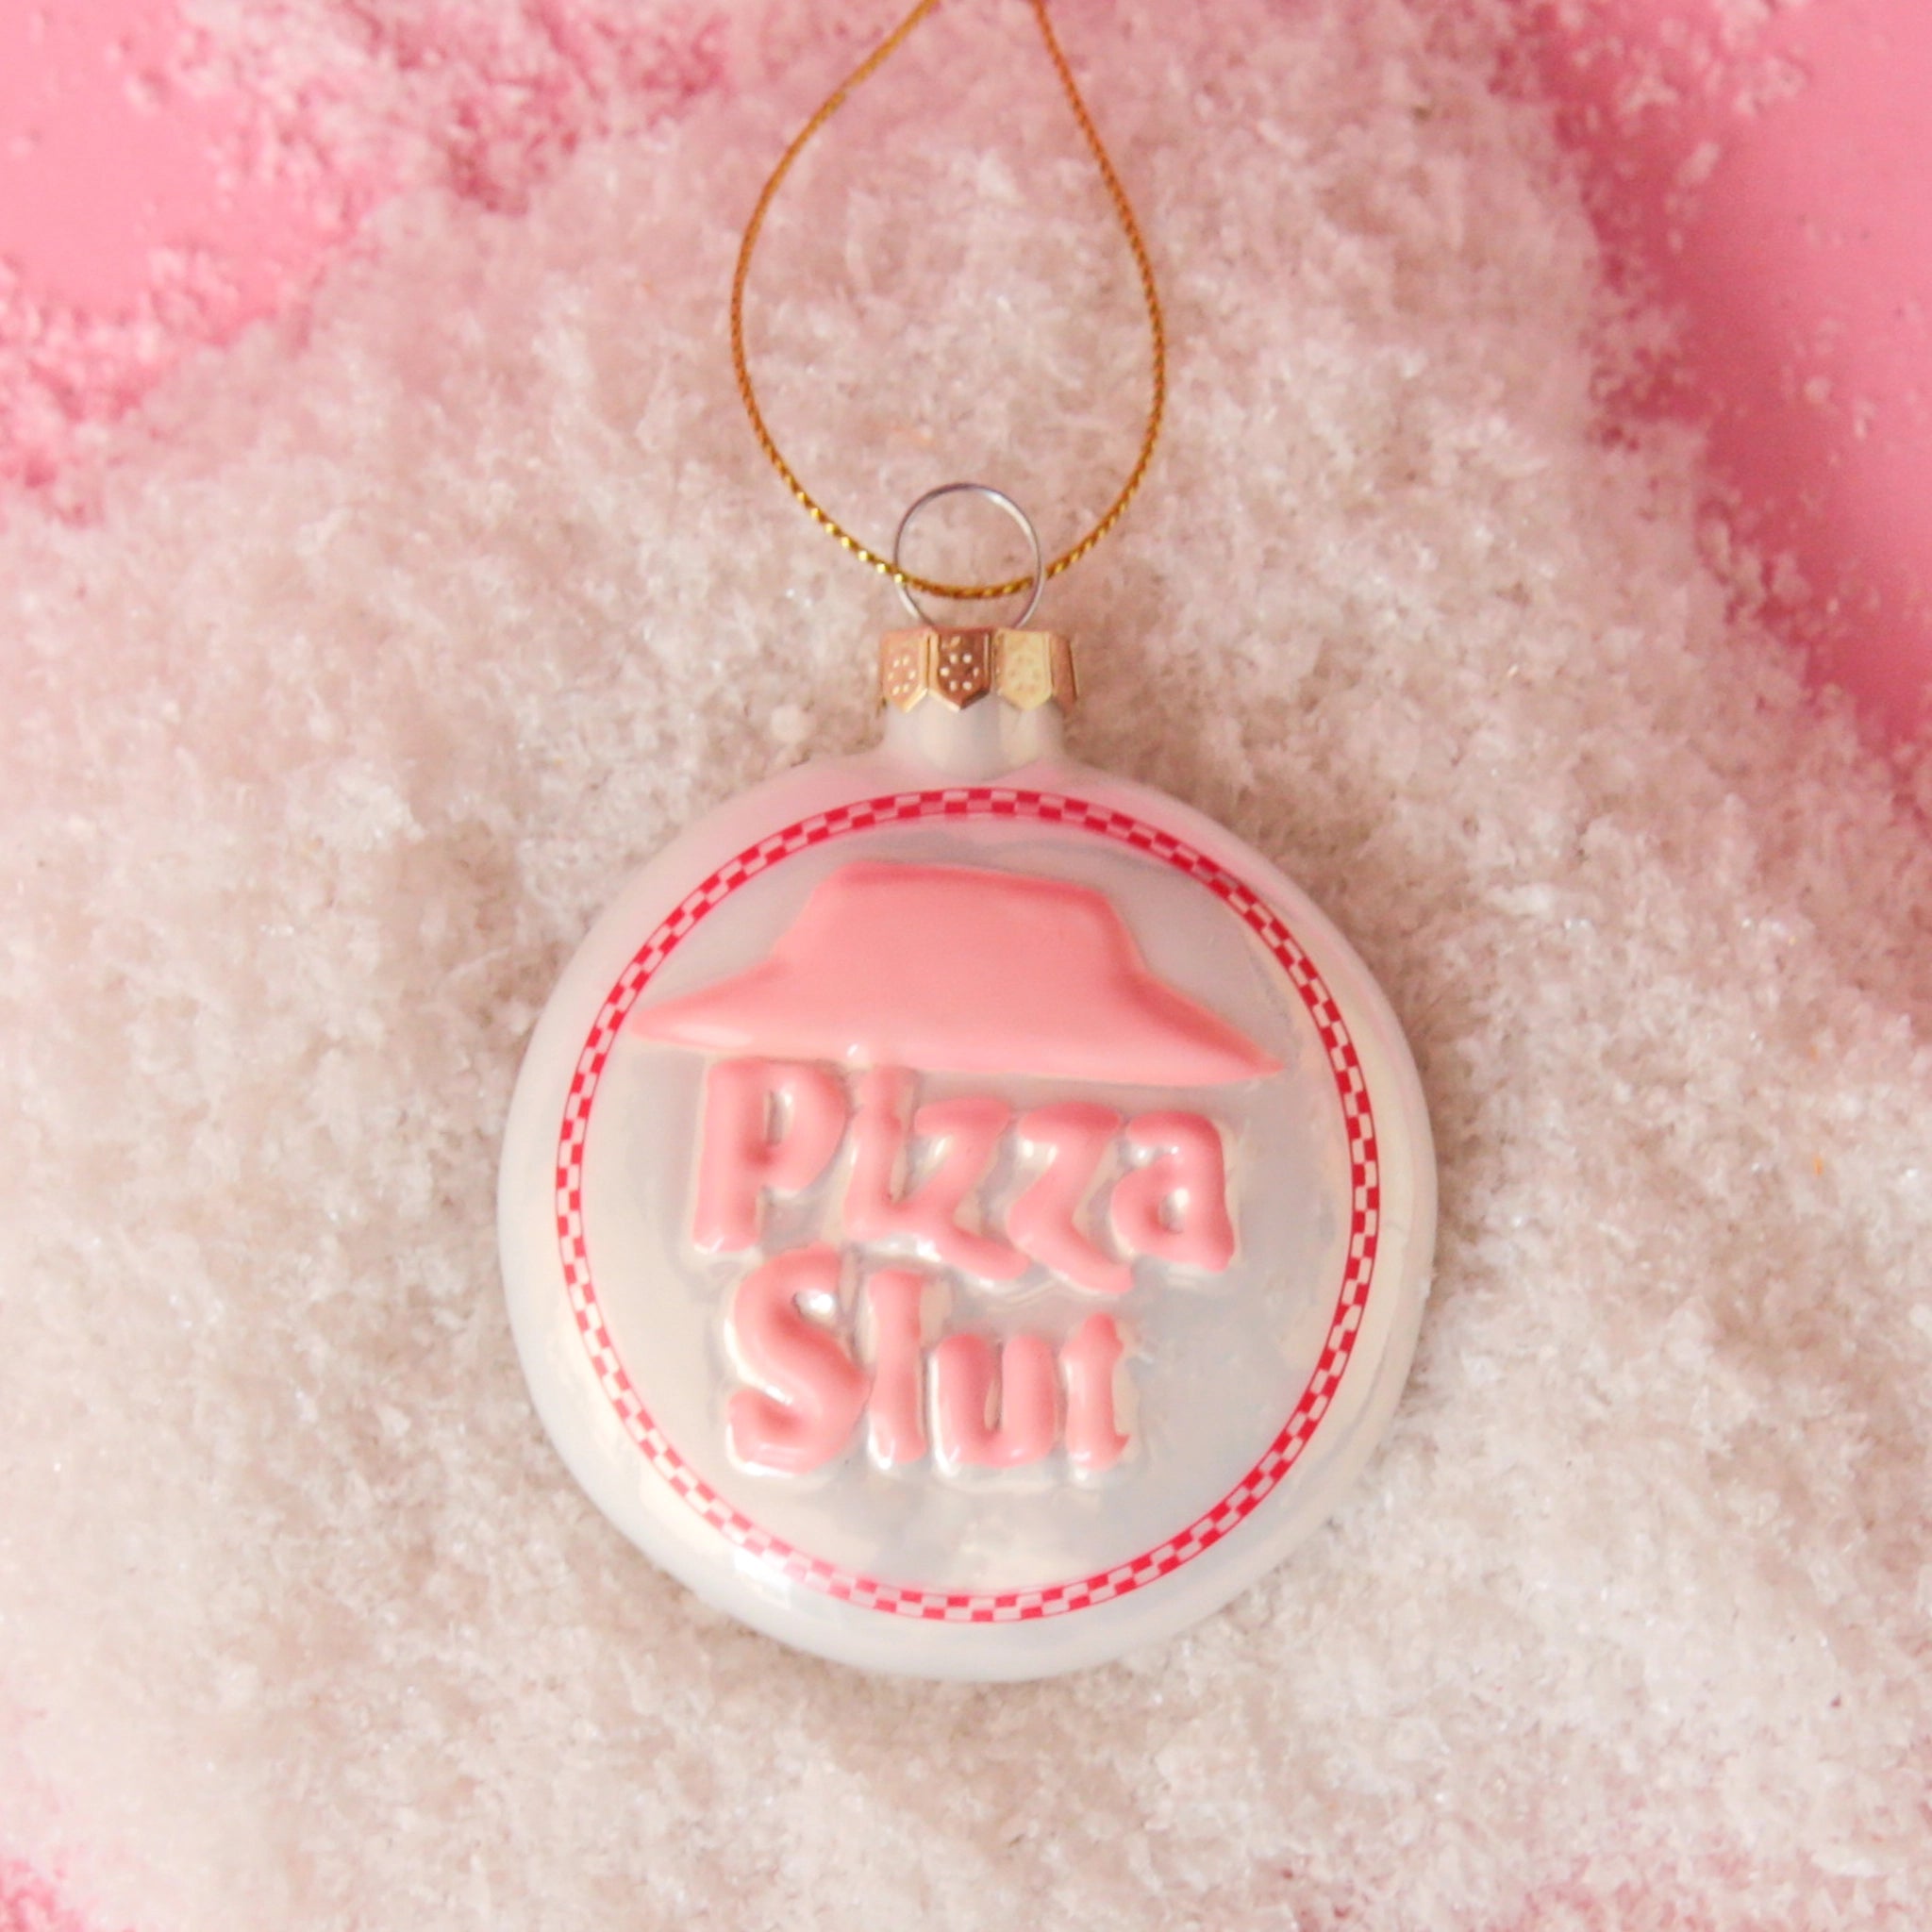 On a pink snowy background is a white and pink circle glass ornament that has text in the center that reads, &quot;Pizza Slut&quot;.